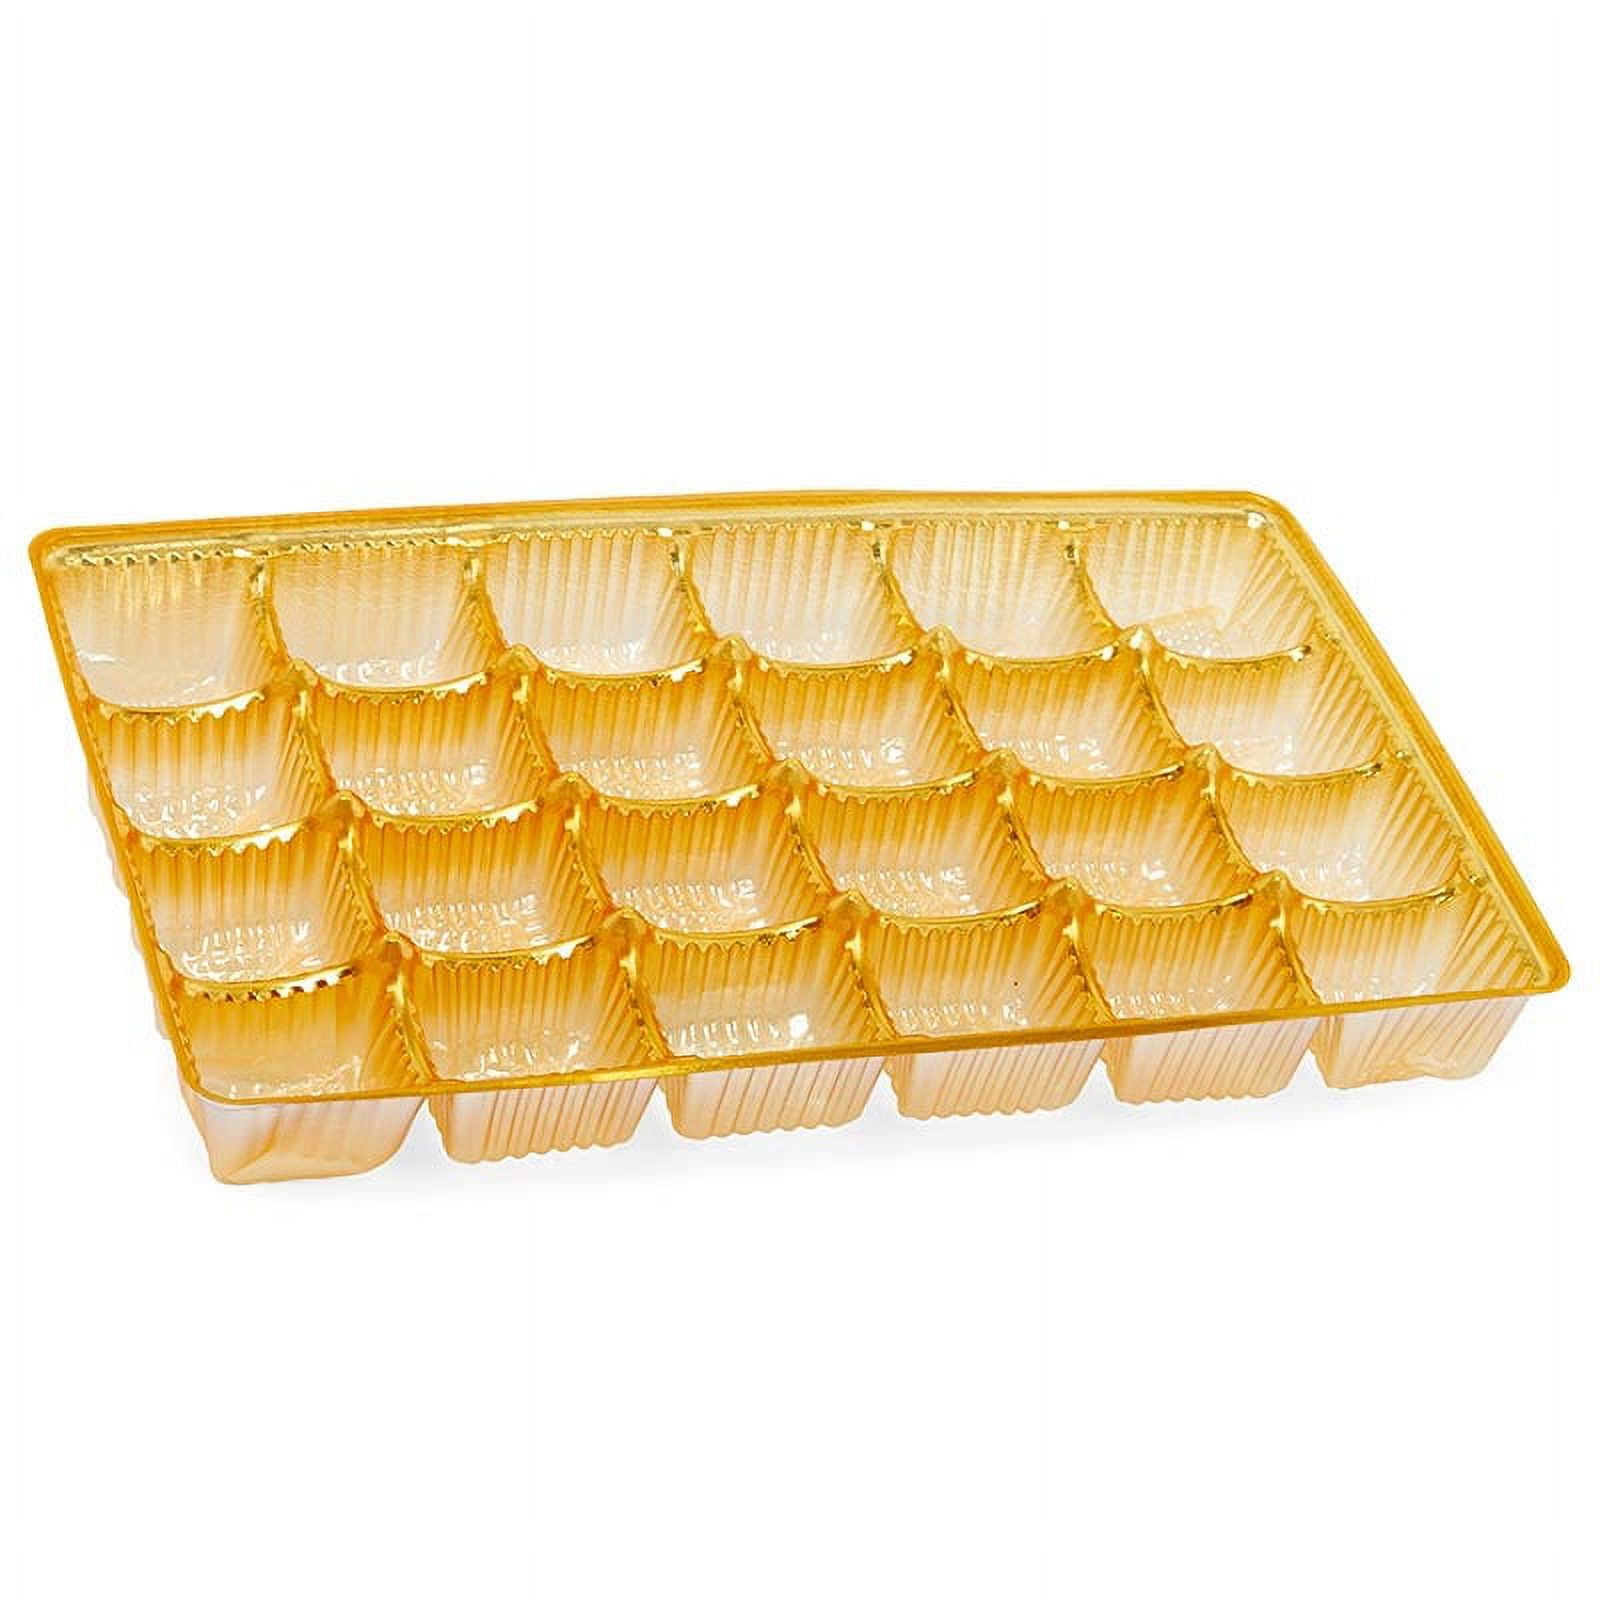 Package of 24 Metallic Gold 5-1/2 Plastic Candy Scoops